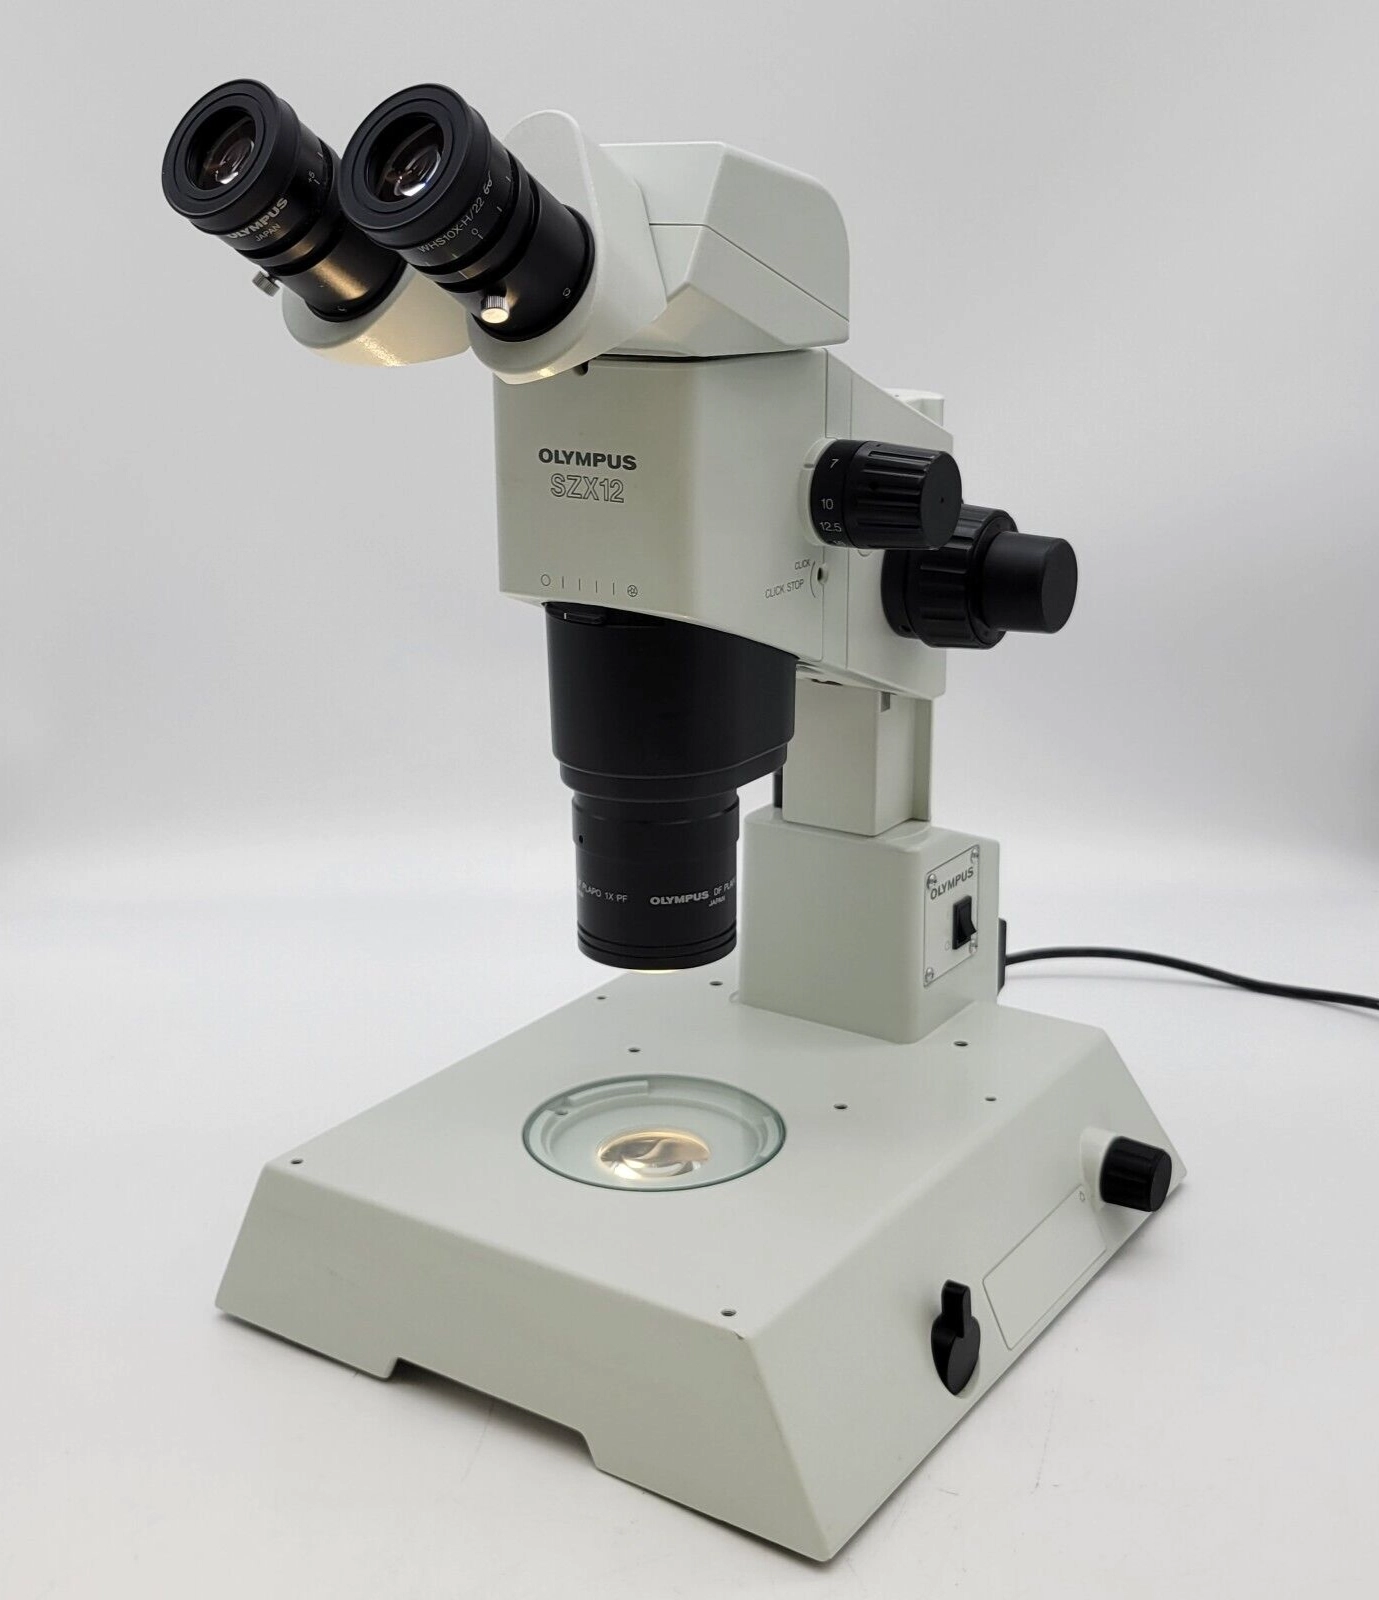 Olympus Stereo Microscope SZX12 with Transmitted Light Stand for IVF